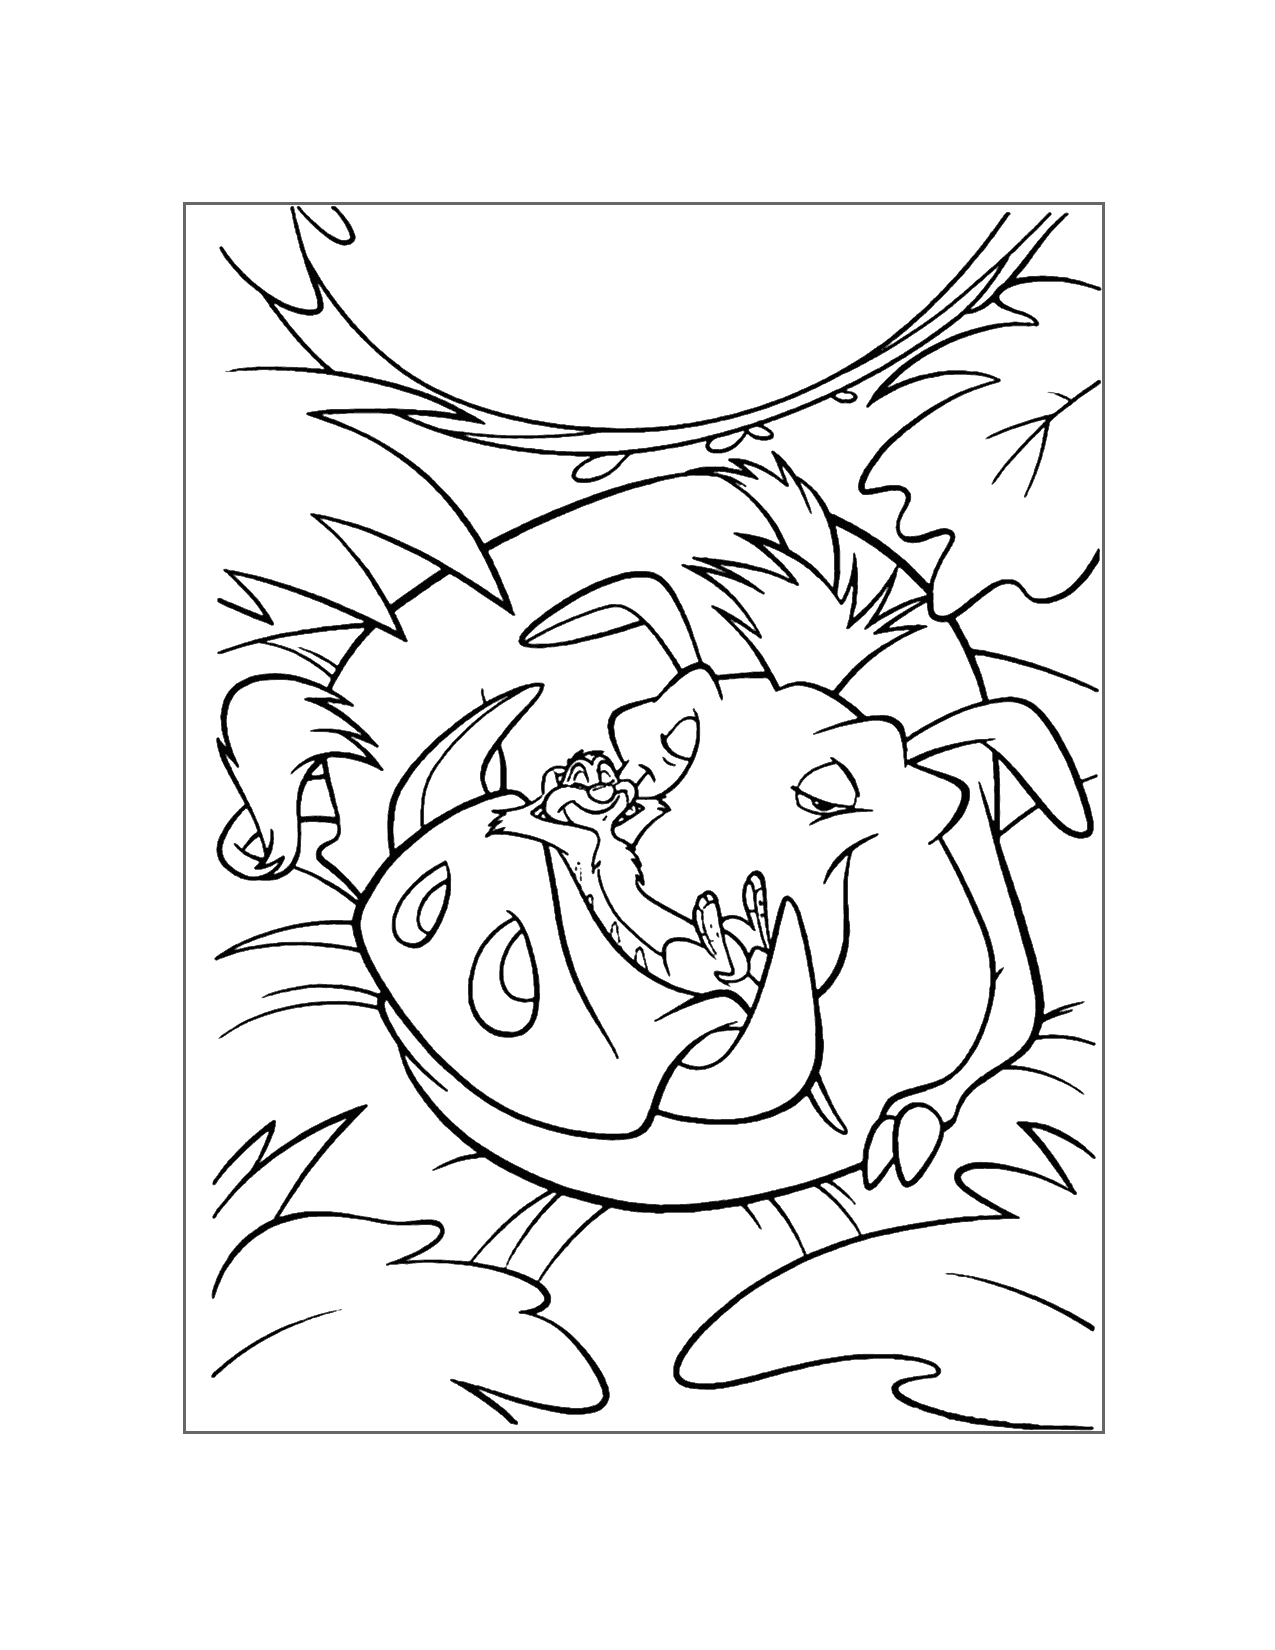 Timon And Pumba Sleeping Coloring Page